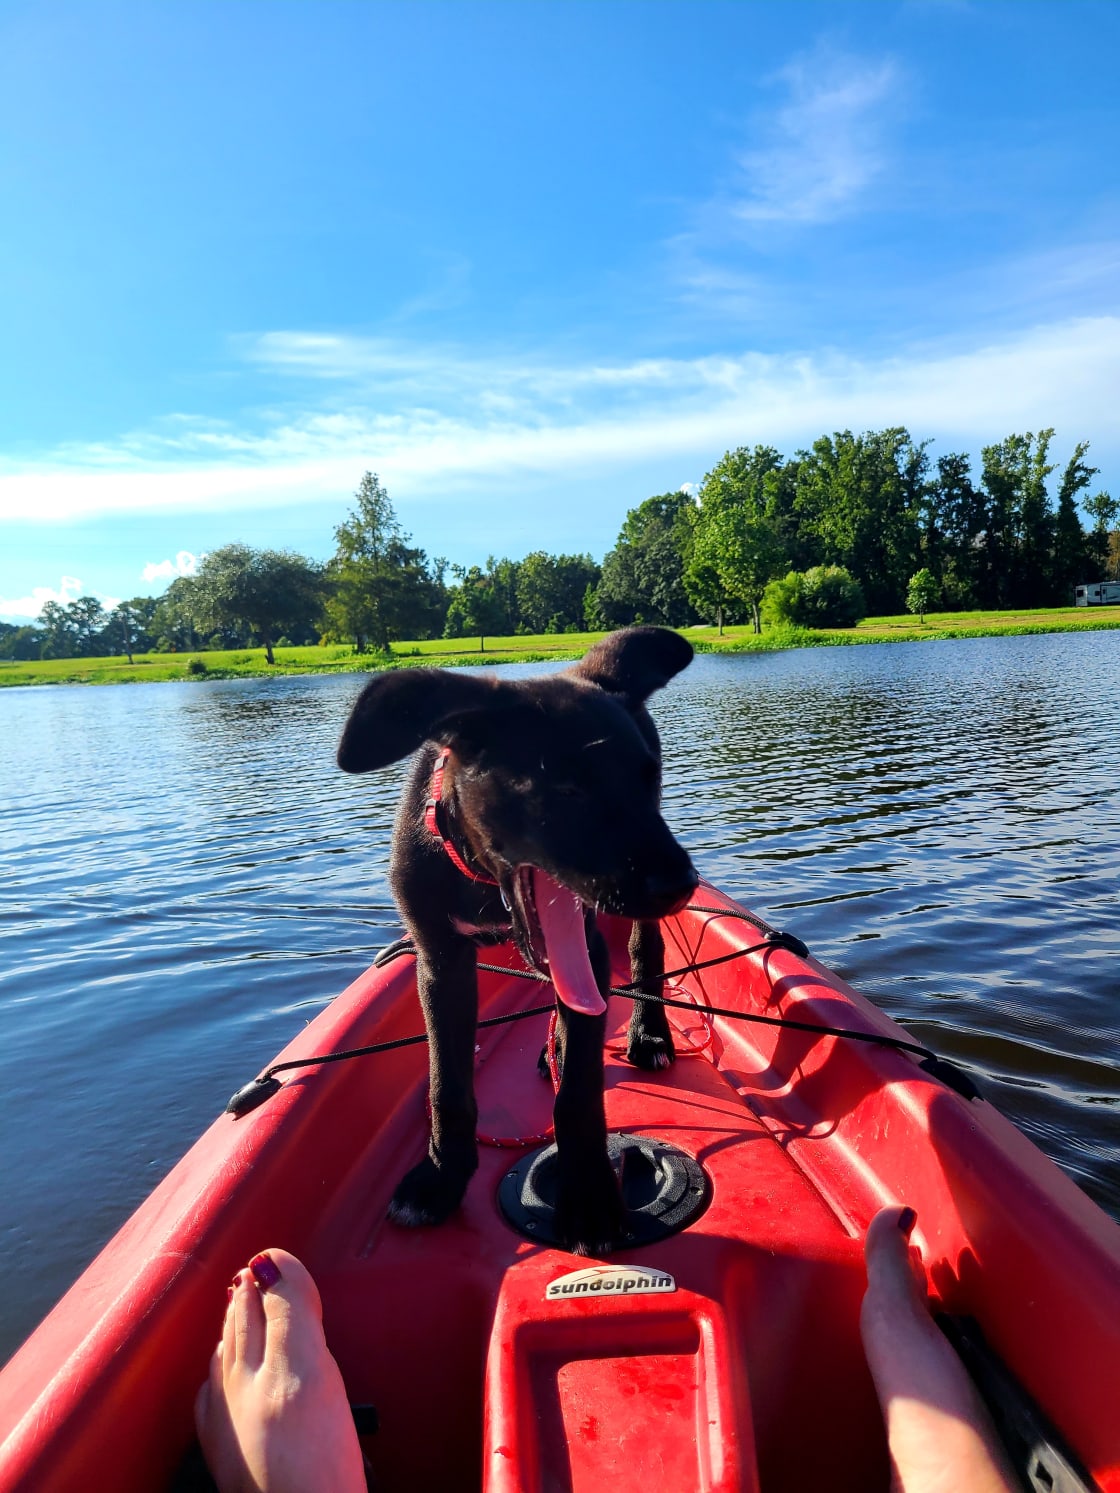 Pet friendly! Your pups love to Kayak too! 